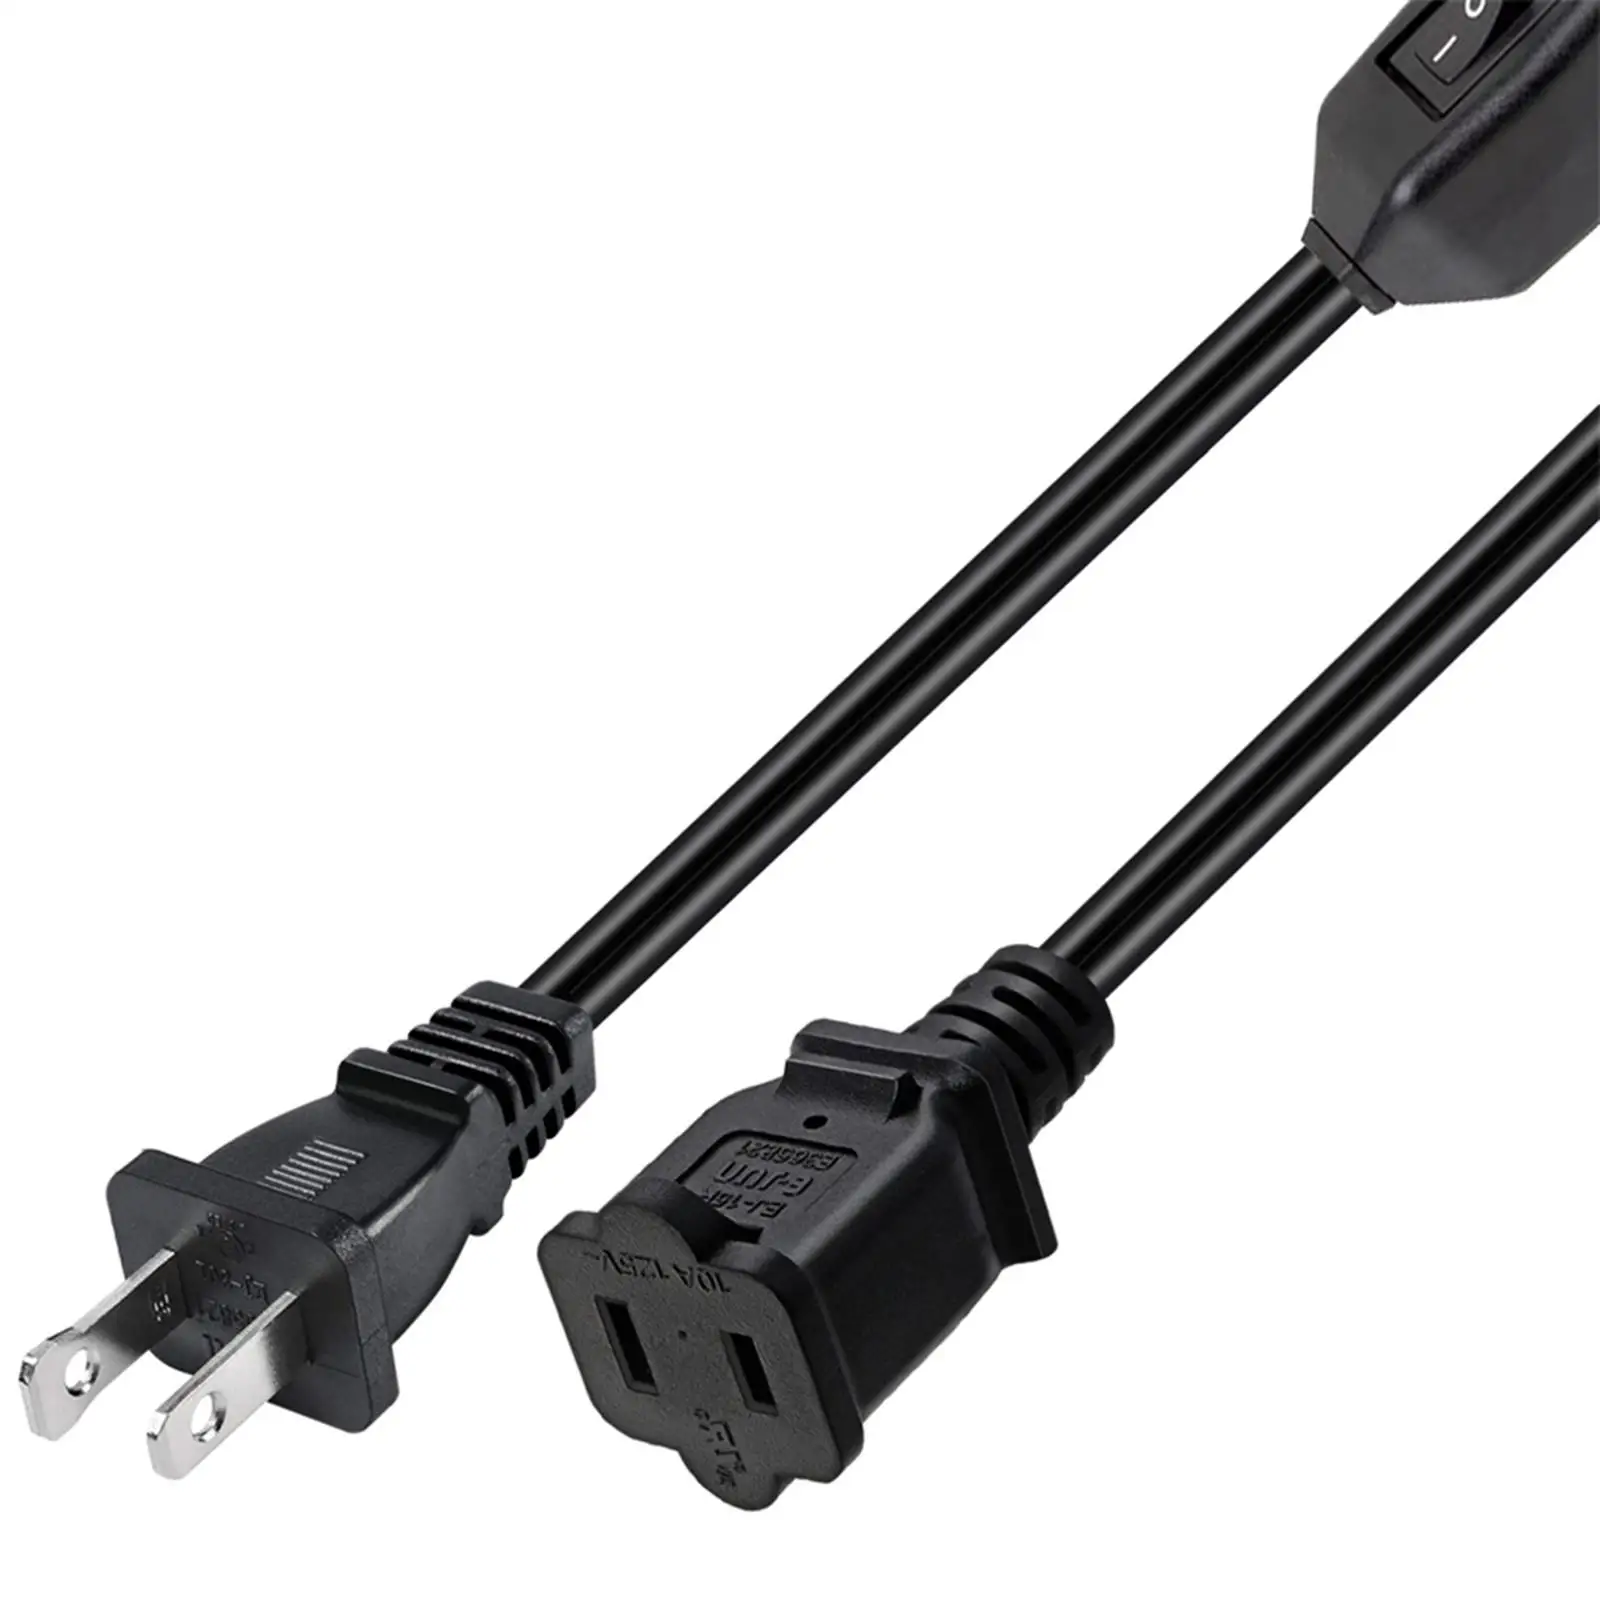 32cm Switch Extension Cord 2 Prong Power Supply cord 13A 125V 2500W Durable on/ off for fan Lamp LED